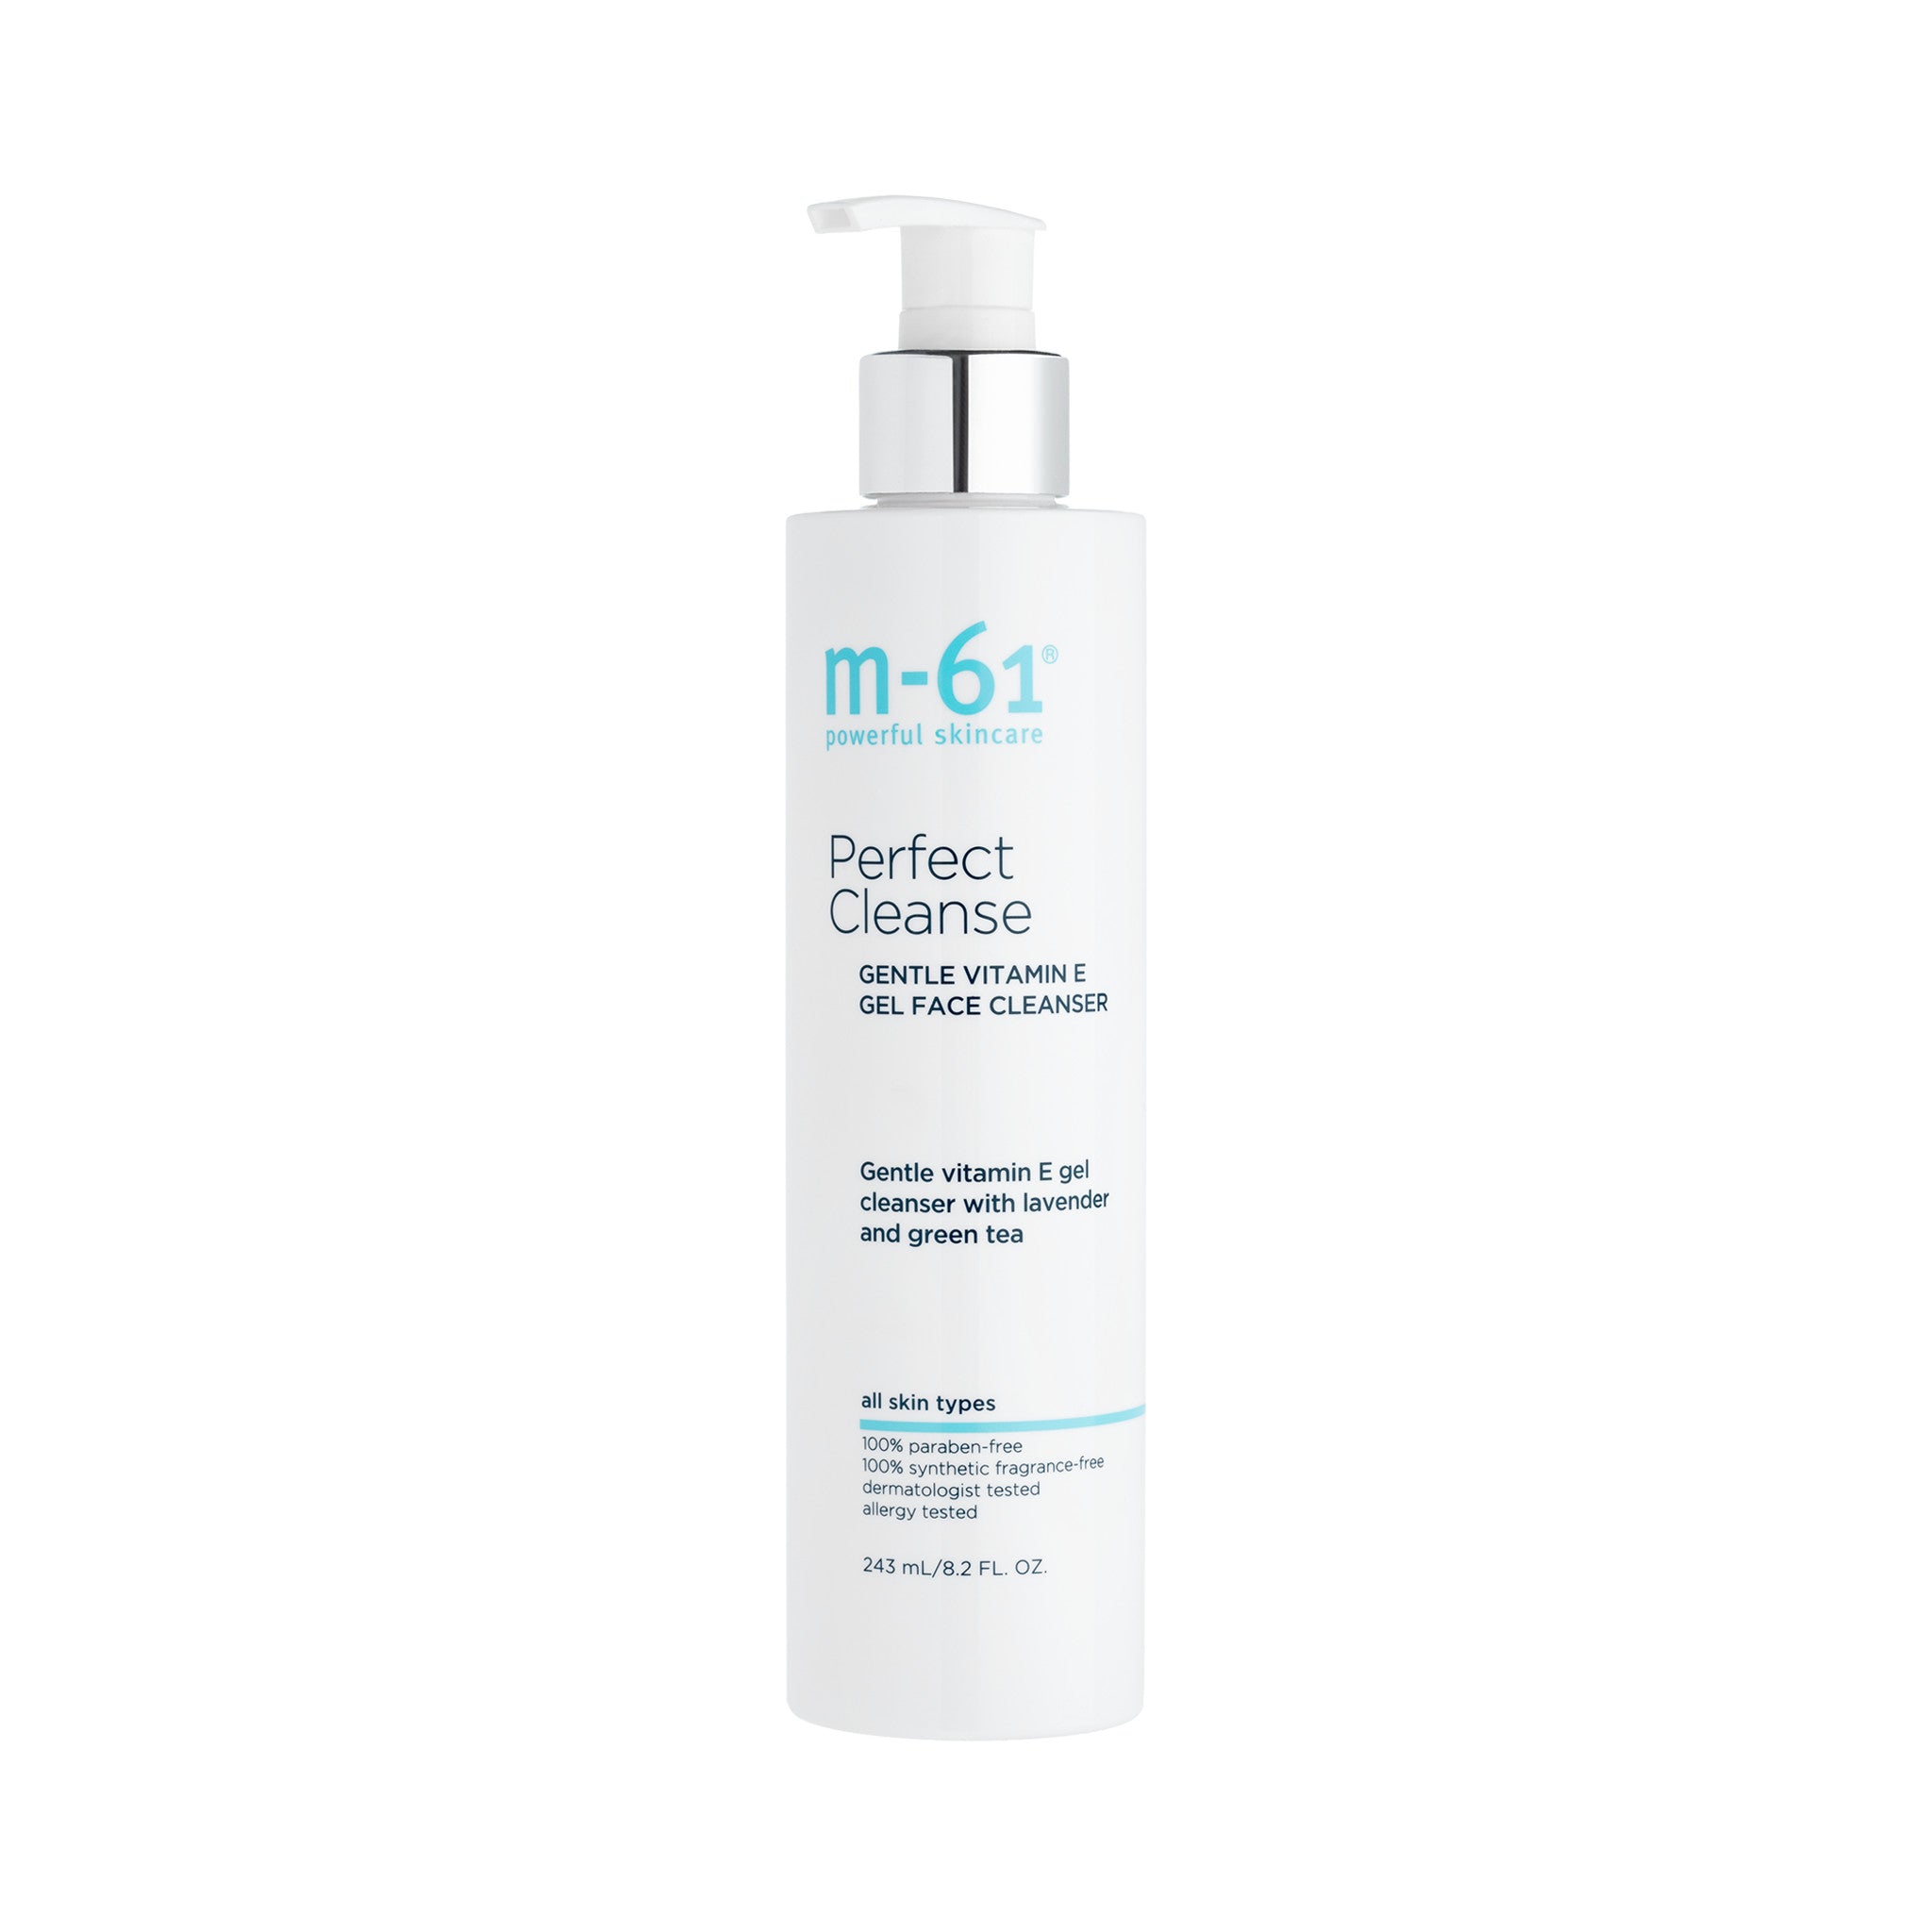 M-61 Perfect Cleanse Size variant: 8.4 fl oz | 250 ml main image.